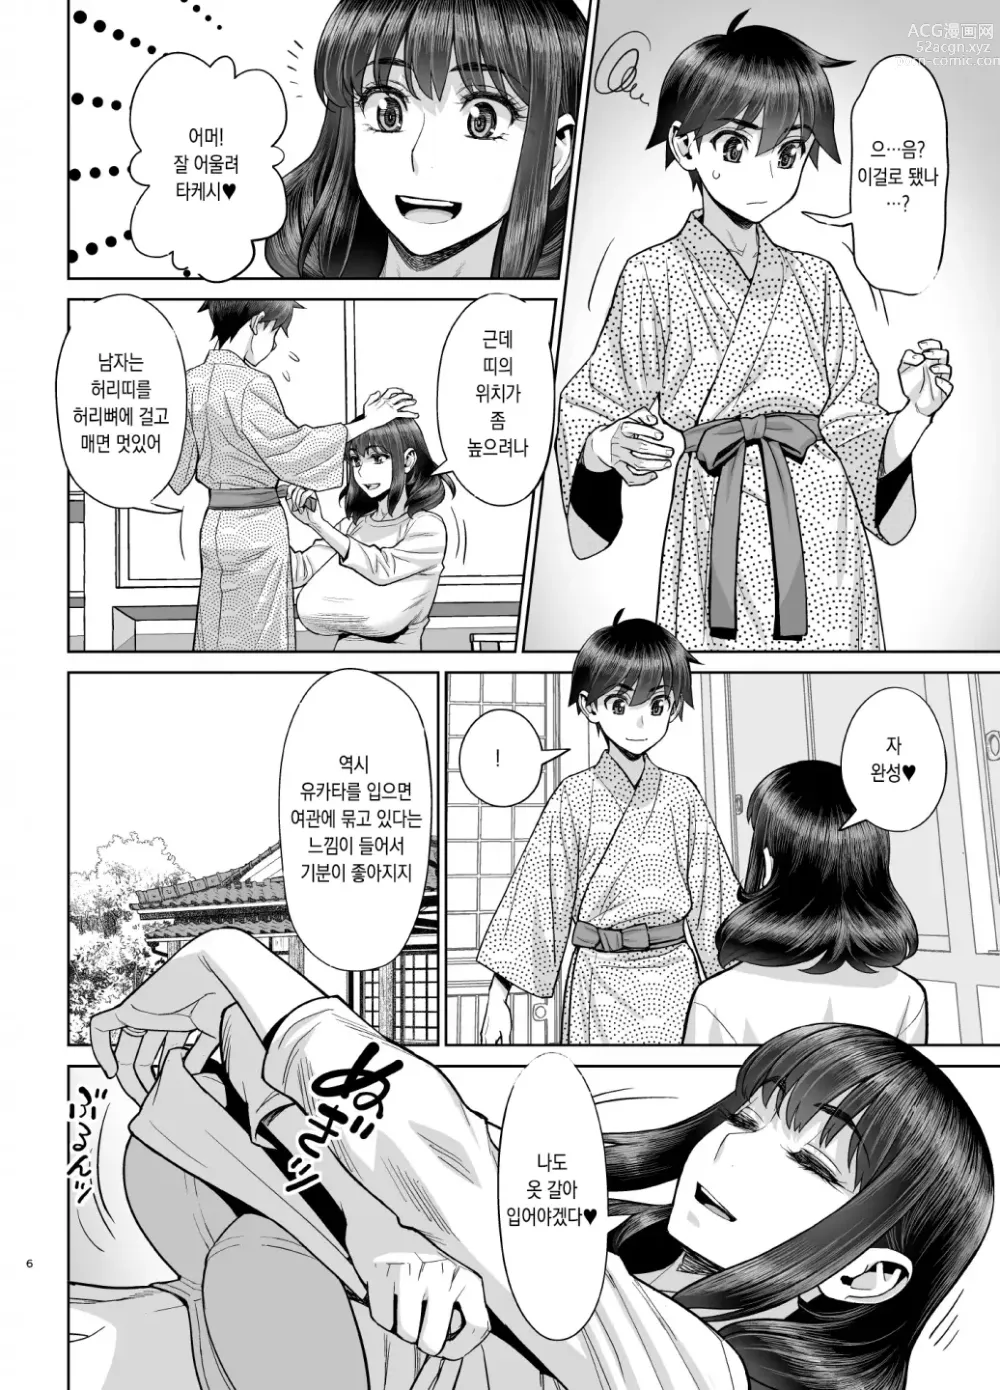 Page 6 of doujinshi 첫숙박 섹스